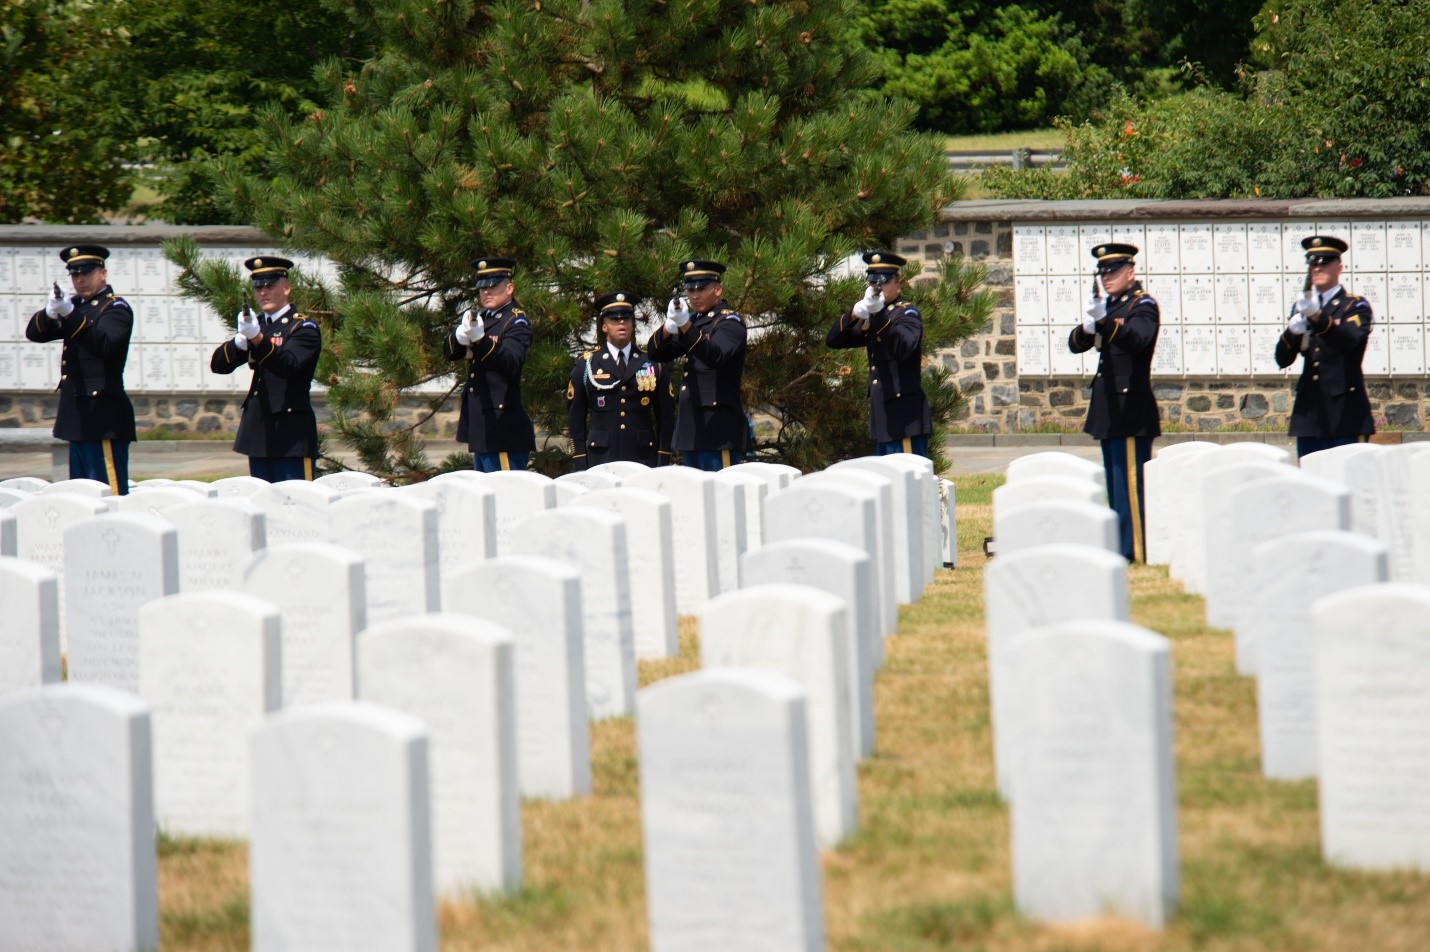 Soldiers of the 3rd Infantry Regiment (The Old Guard) render a three-volley salute during the graveside service for a special op